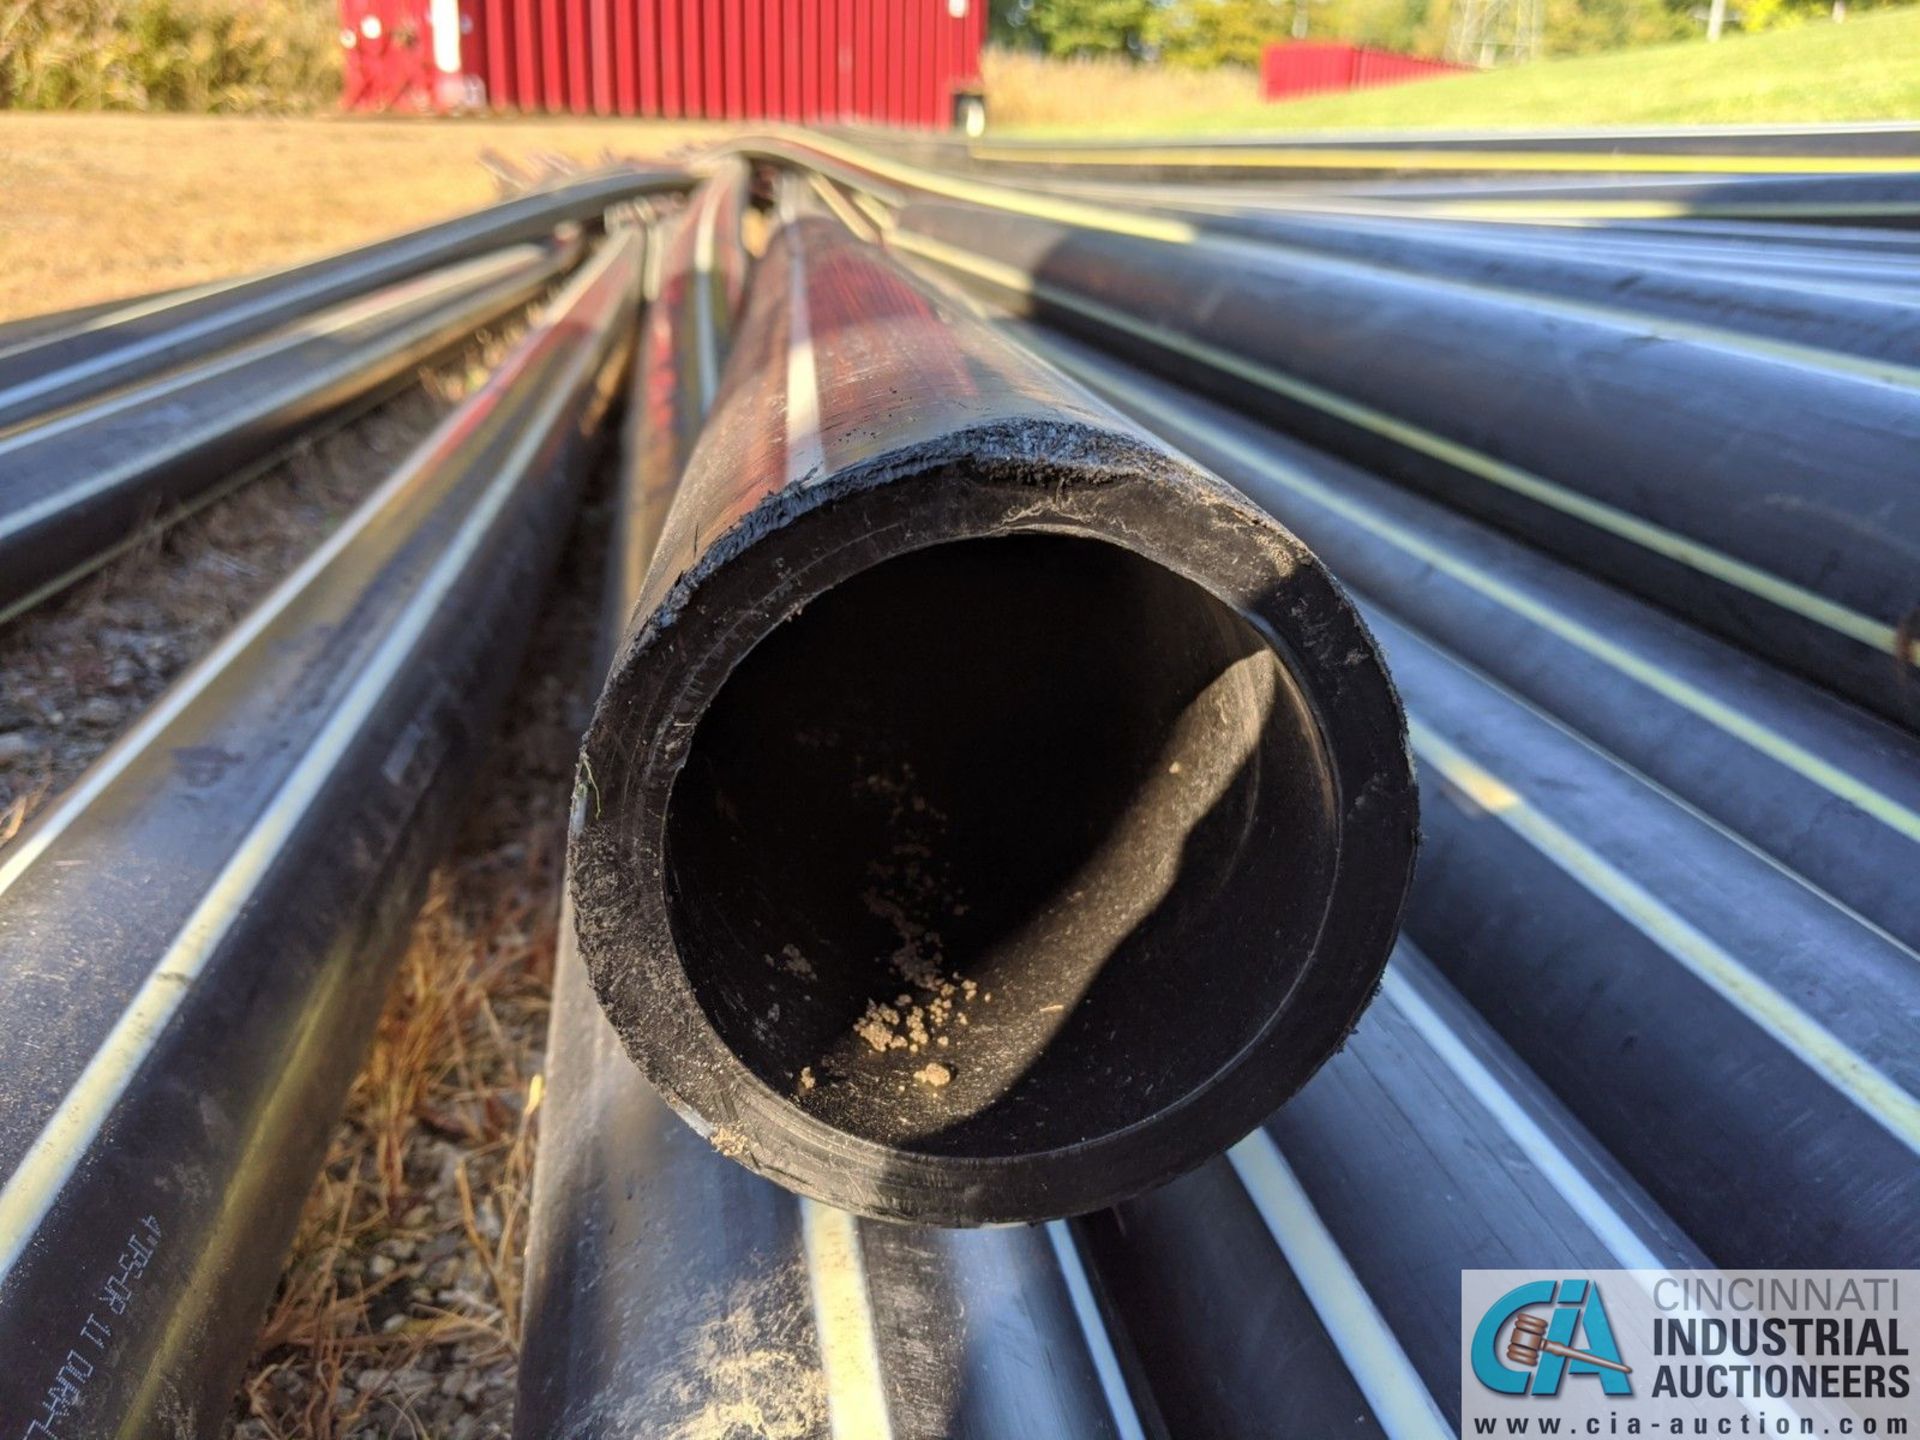 JOINTS OF 4" DIA. X 45' LONG BLACK PLASTIC PIPE (220 Blackbrook Rd., Painsville, OH 44077 - Greg - Image 3 of 3